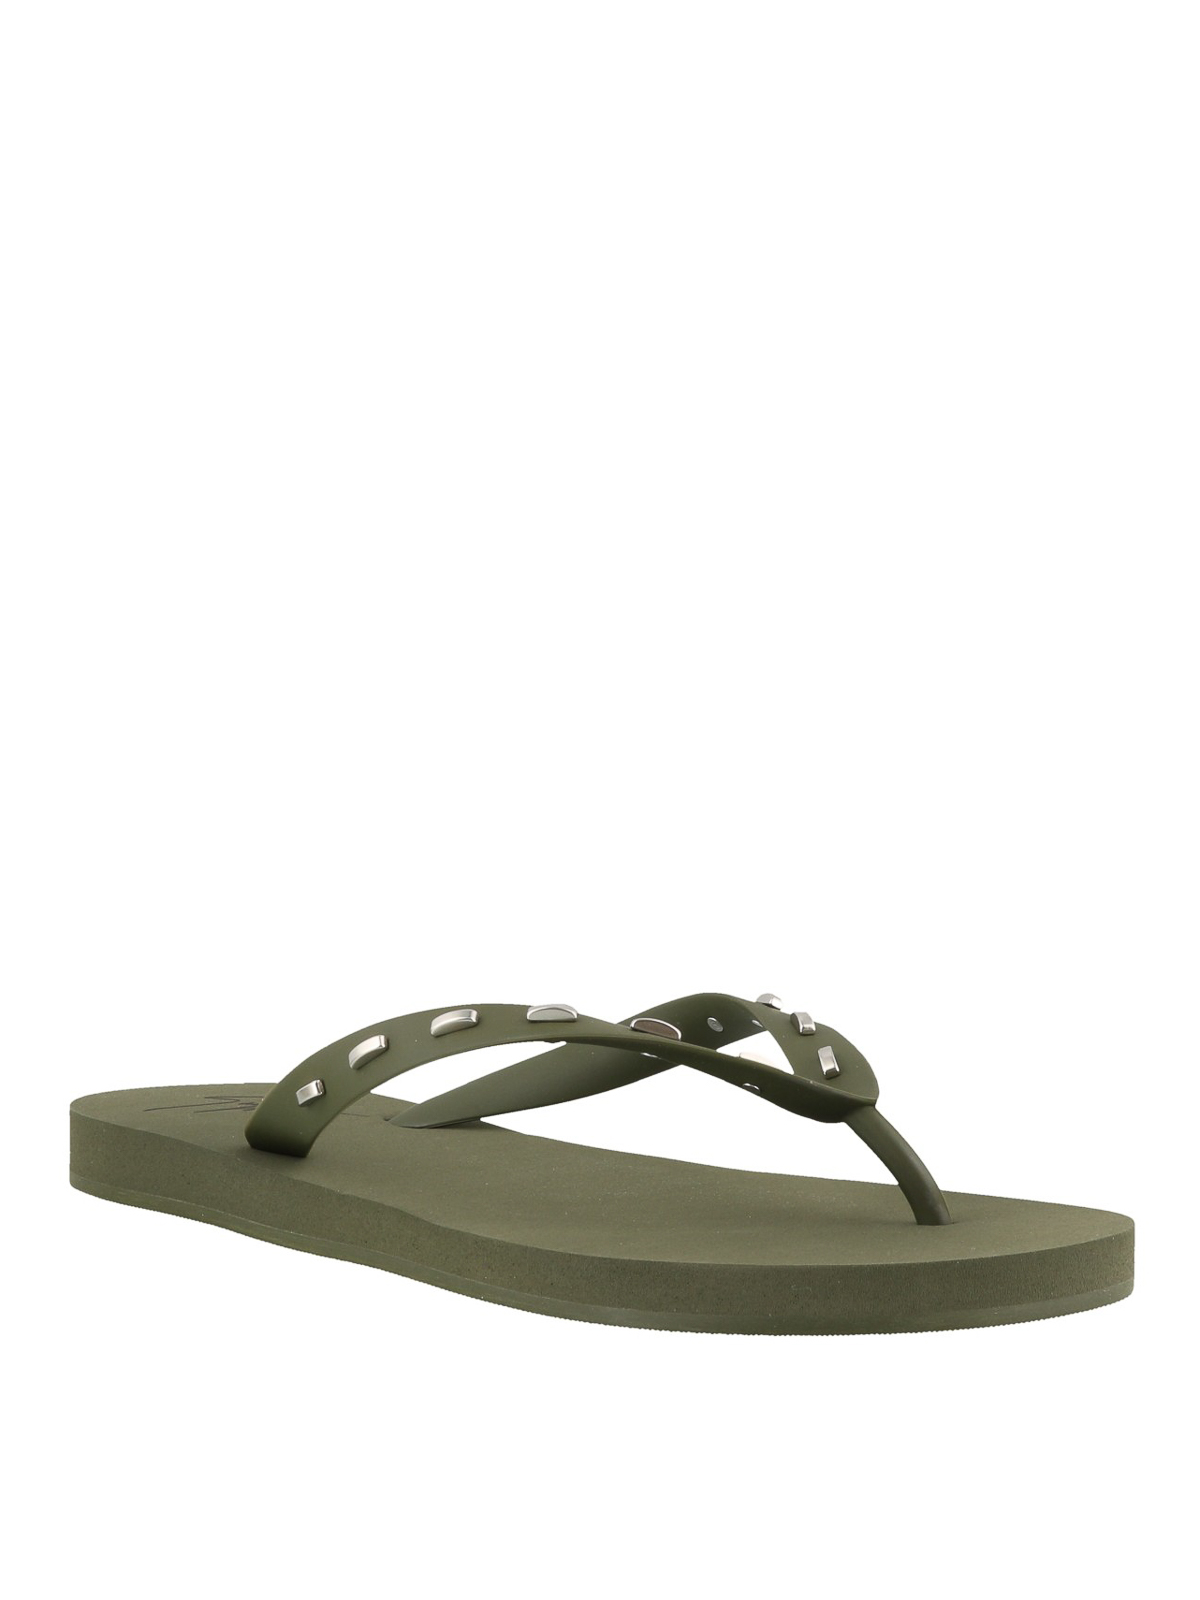 Olive green rubber thong sandals 